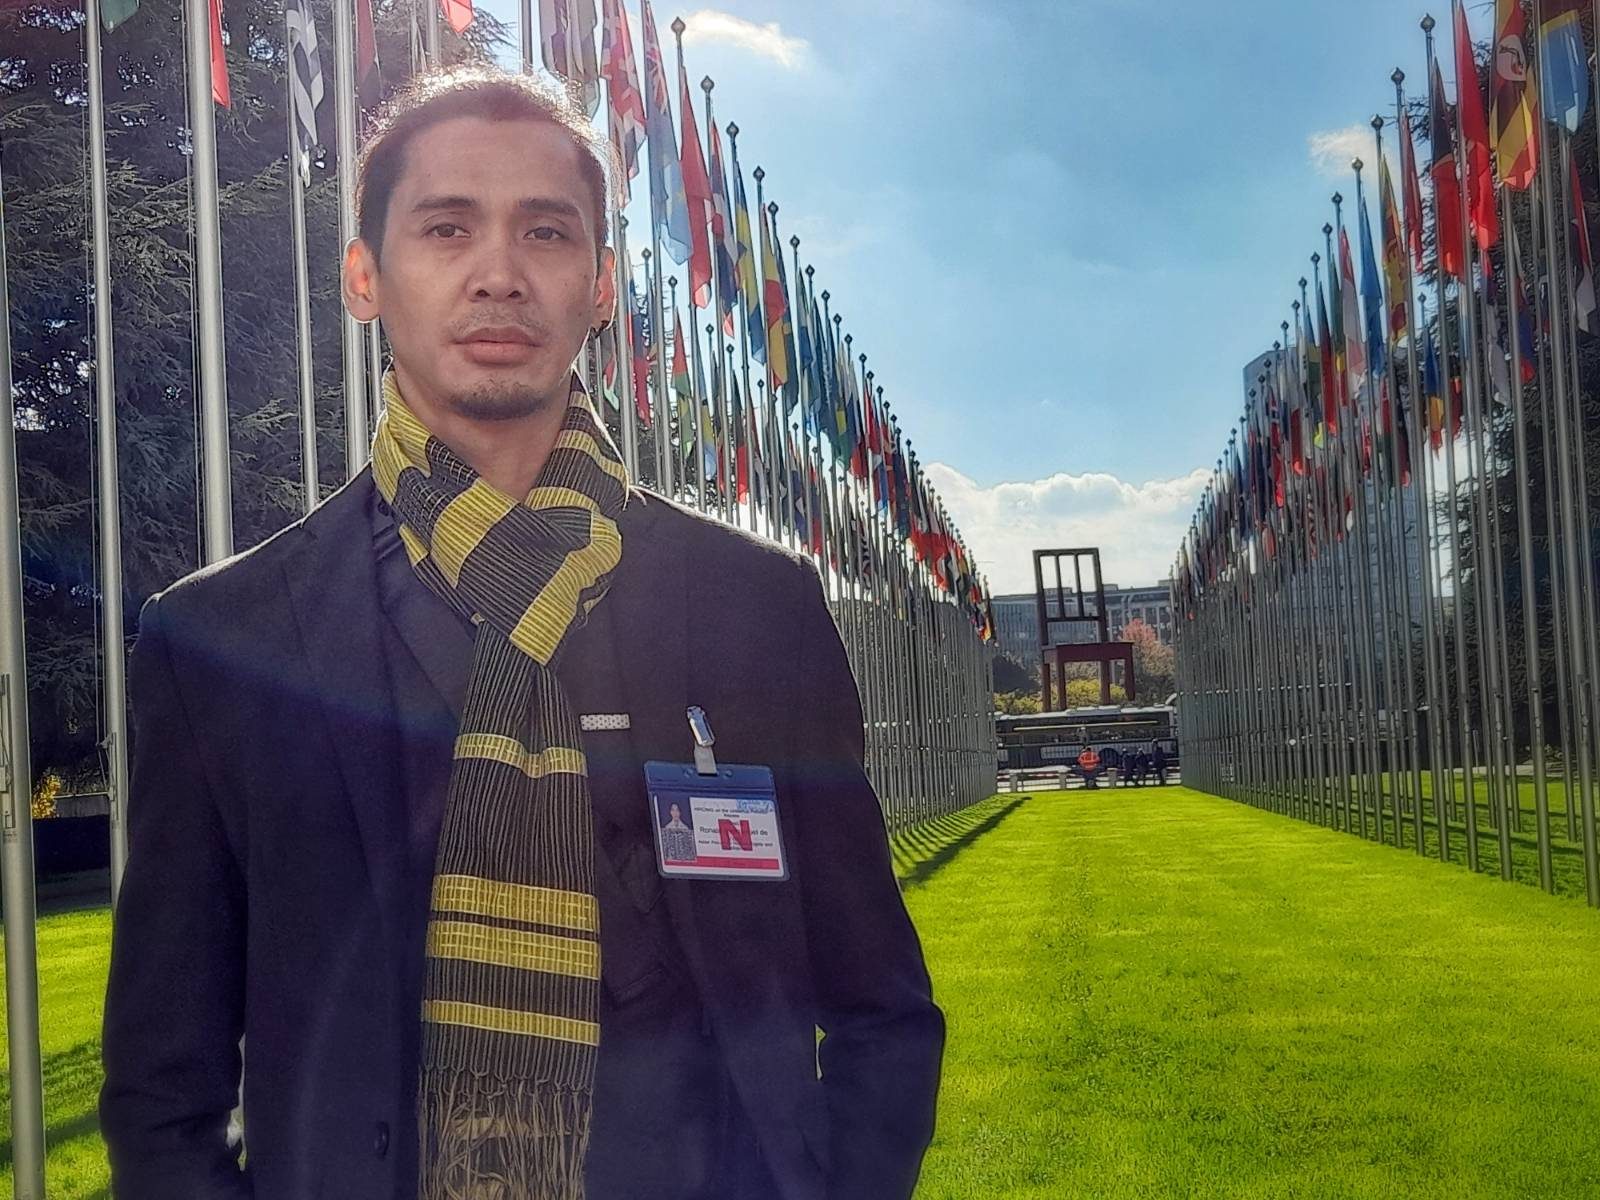 Political prisoner’s son brings freedom campaign to United Nations